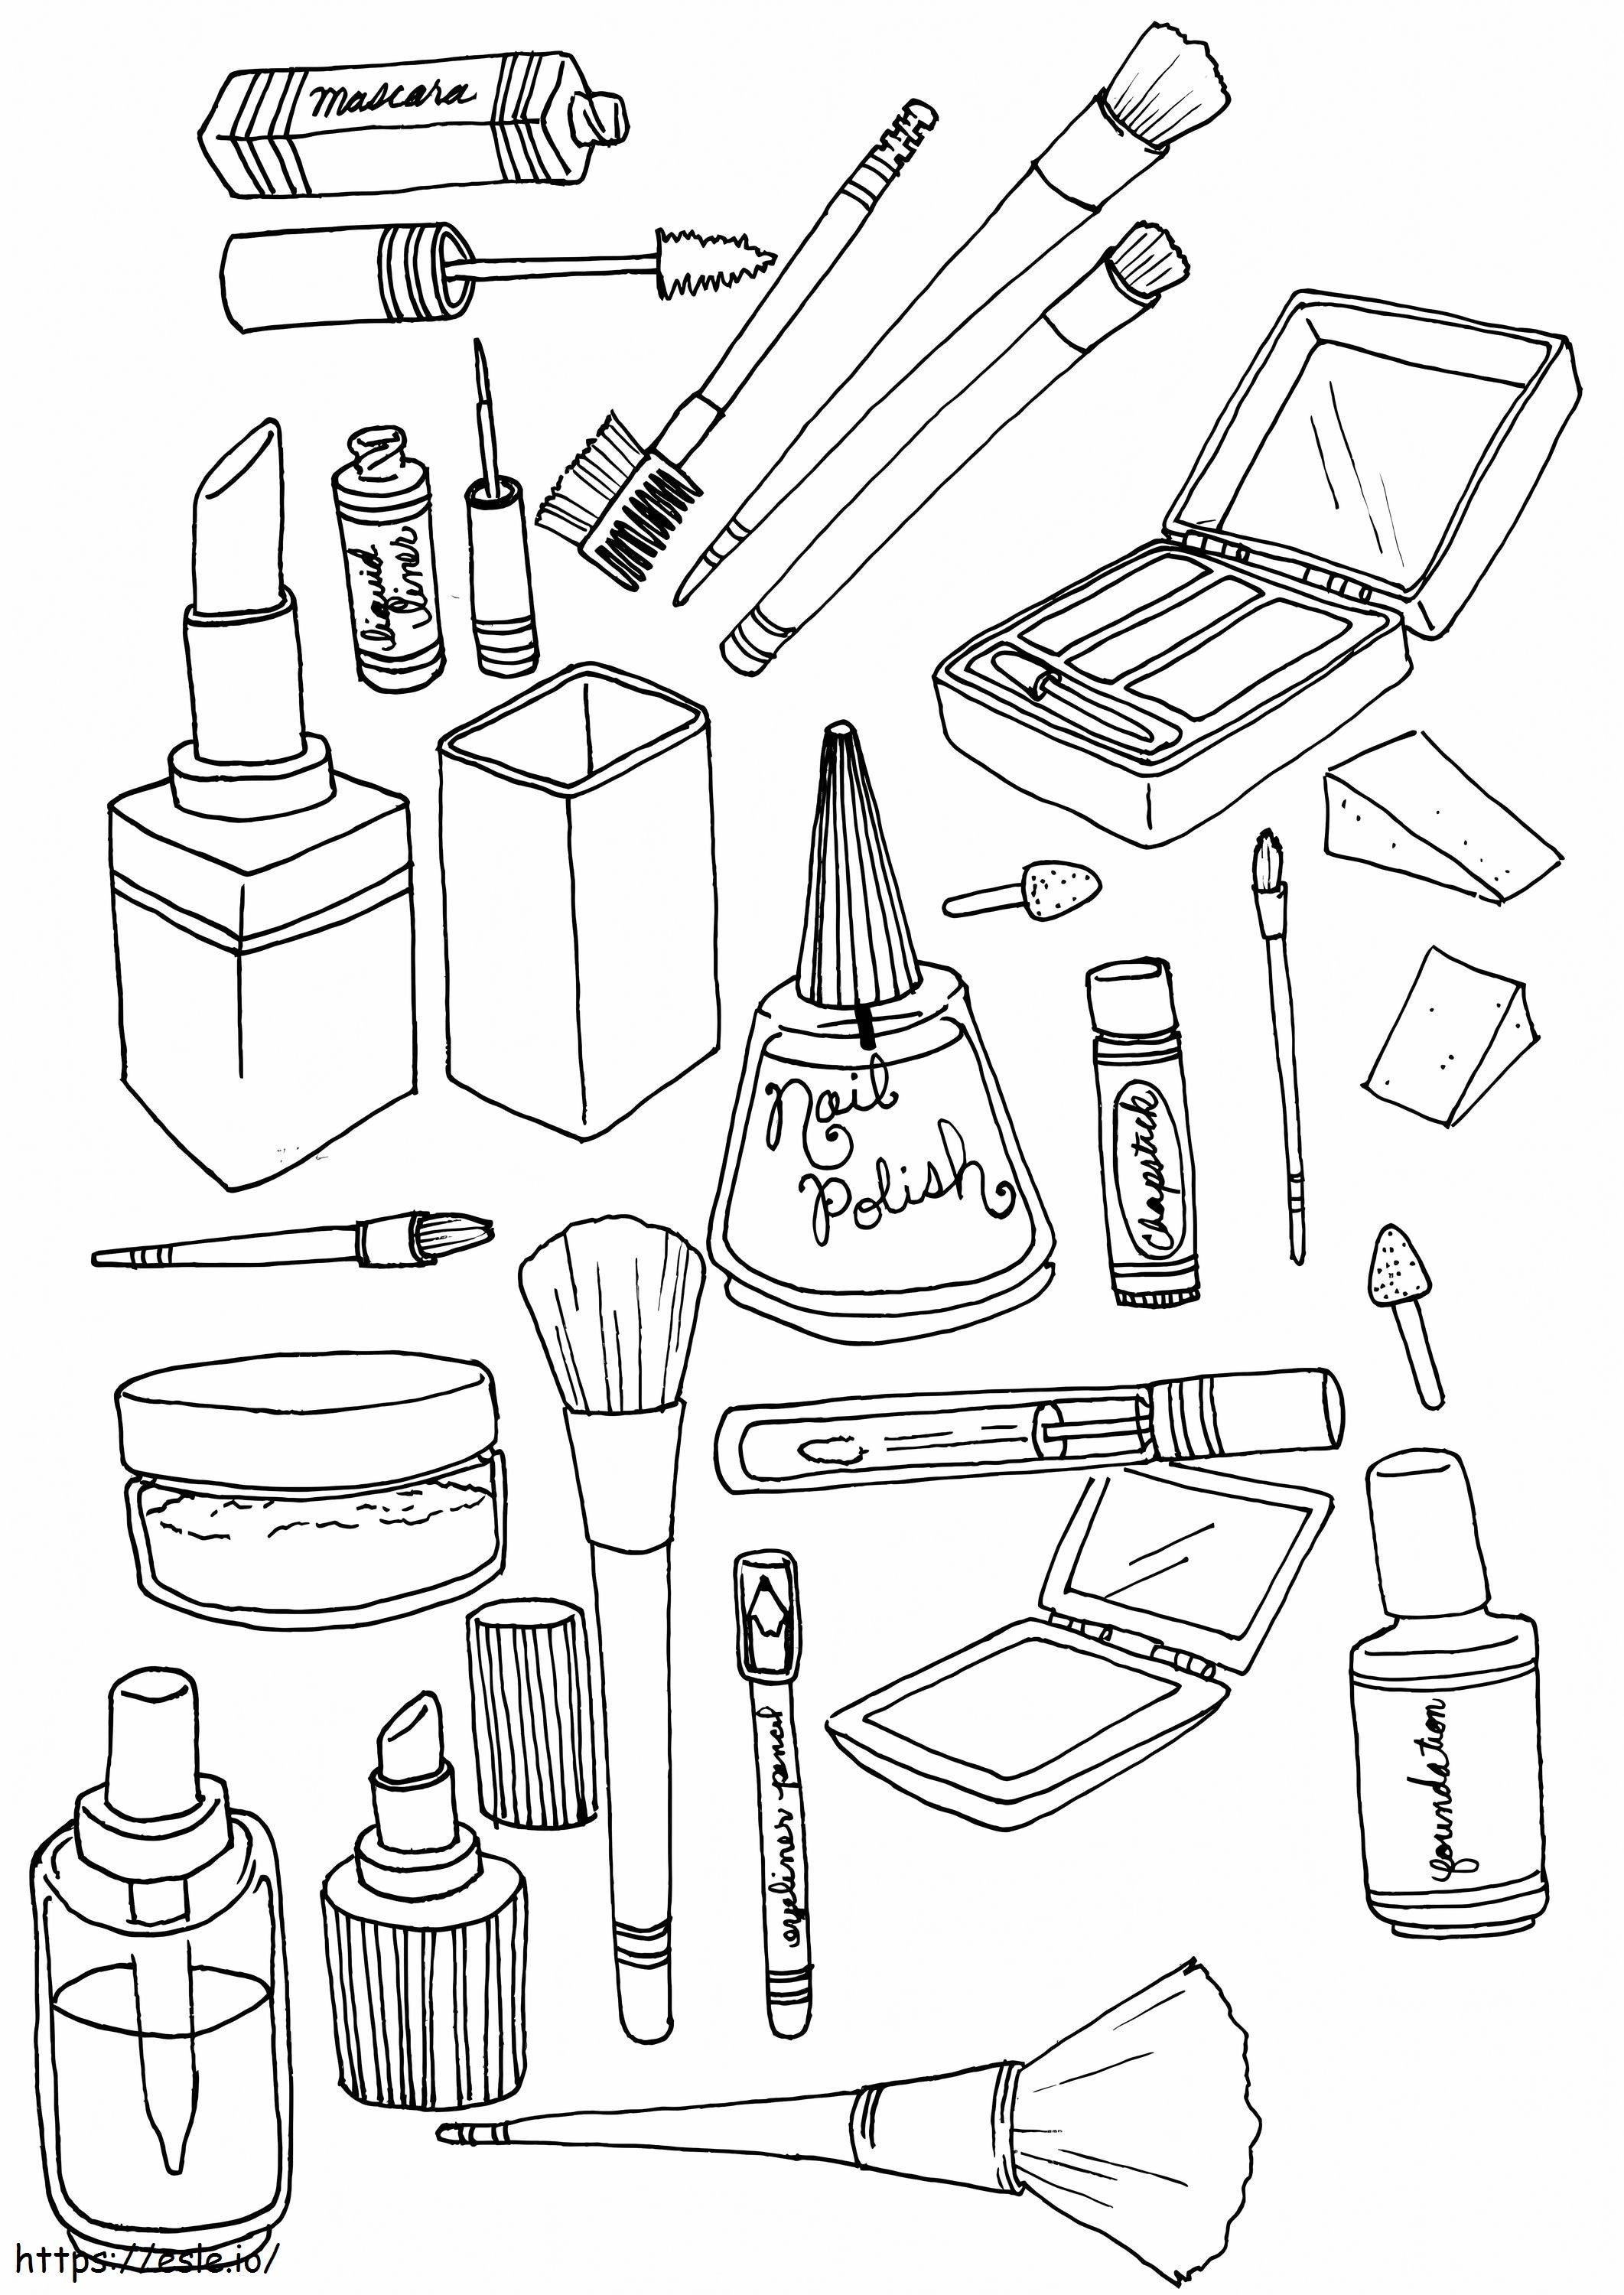 Makeup Tools coloring page